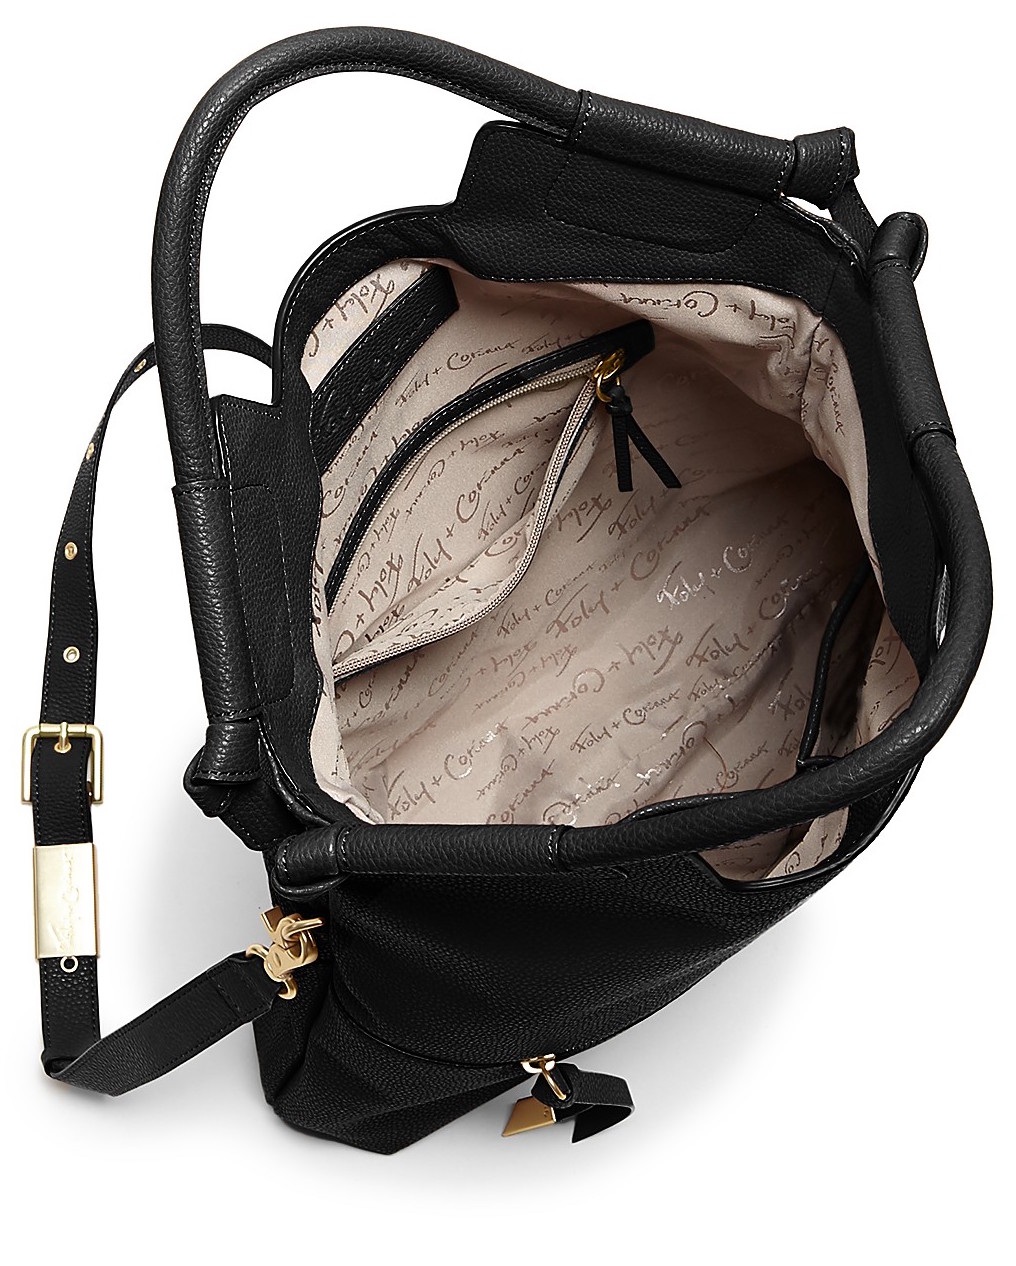 THE SAVVY SHOPPER: The City Tote From Foley+Corinna